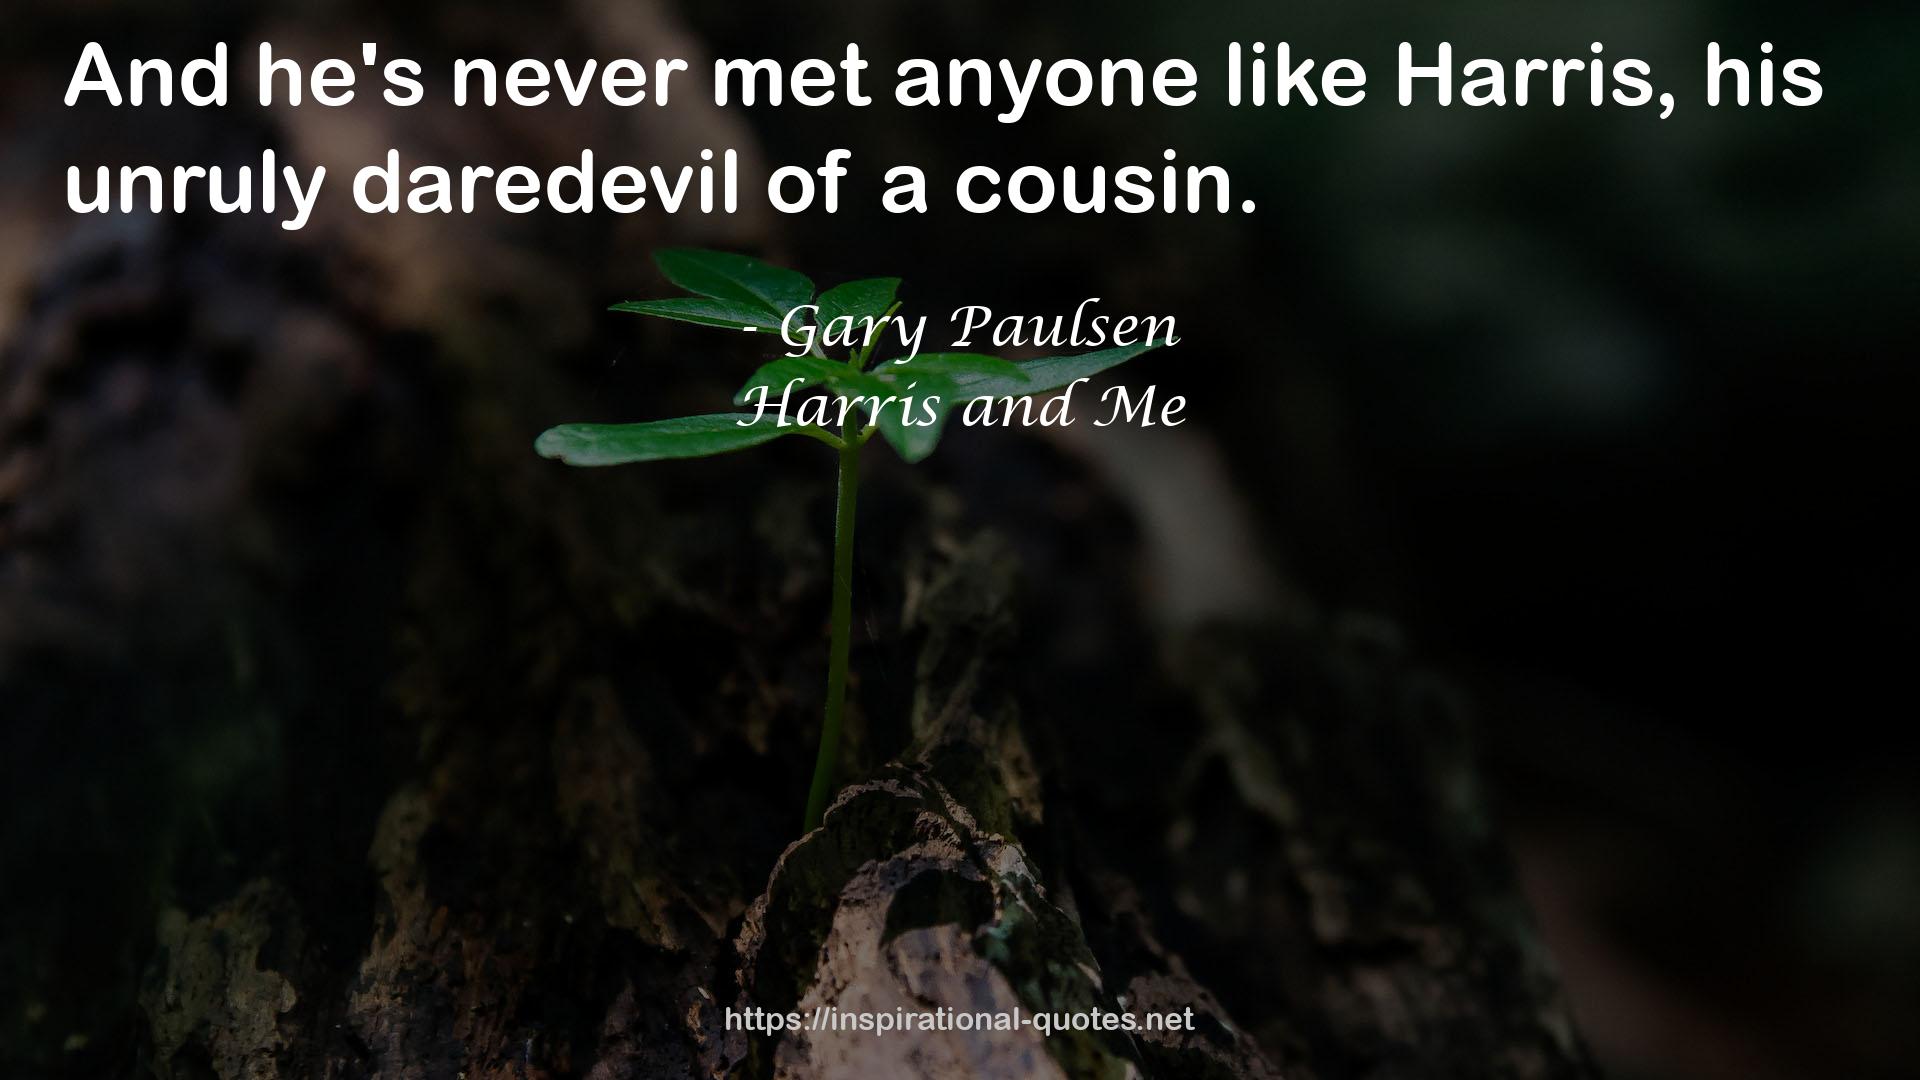 Harris and Me QUOTES